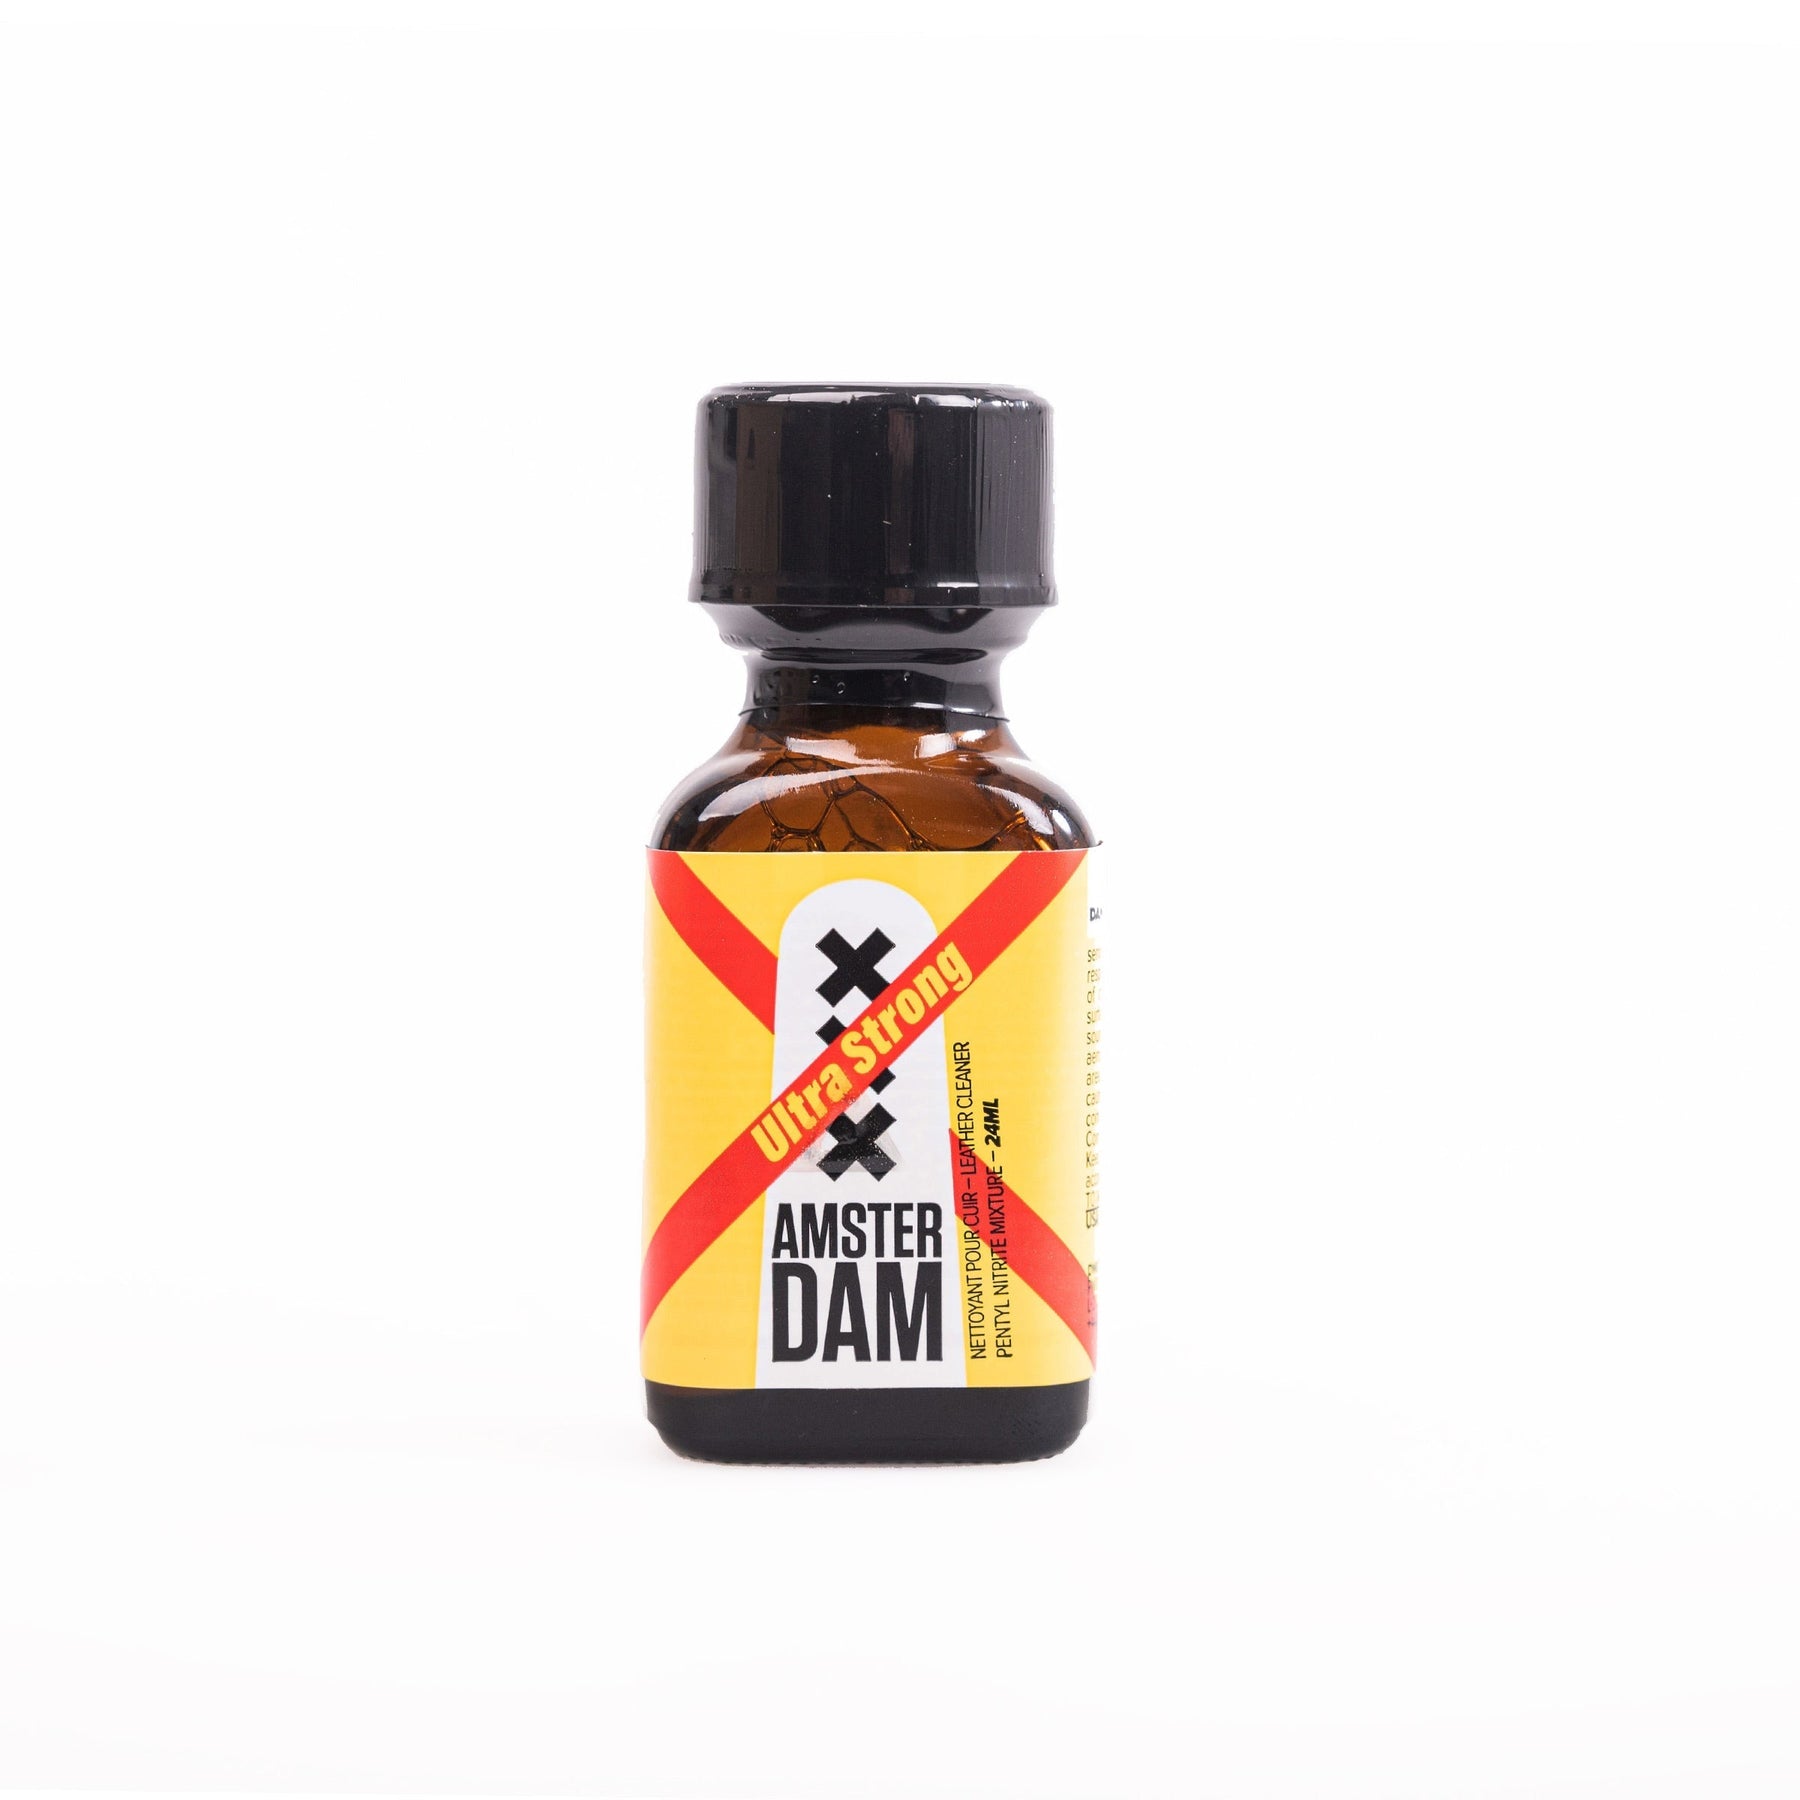 A small, brown glass bottle with a yellow and black label, featuring the text "Amsterdam XXX Ultra Strong Poppers 24ml," against a white background.